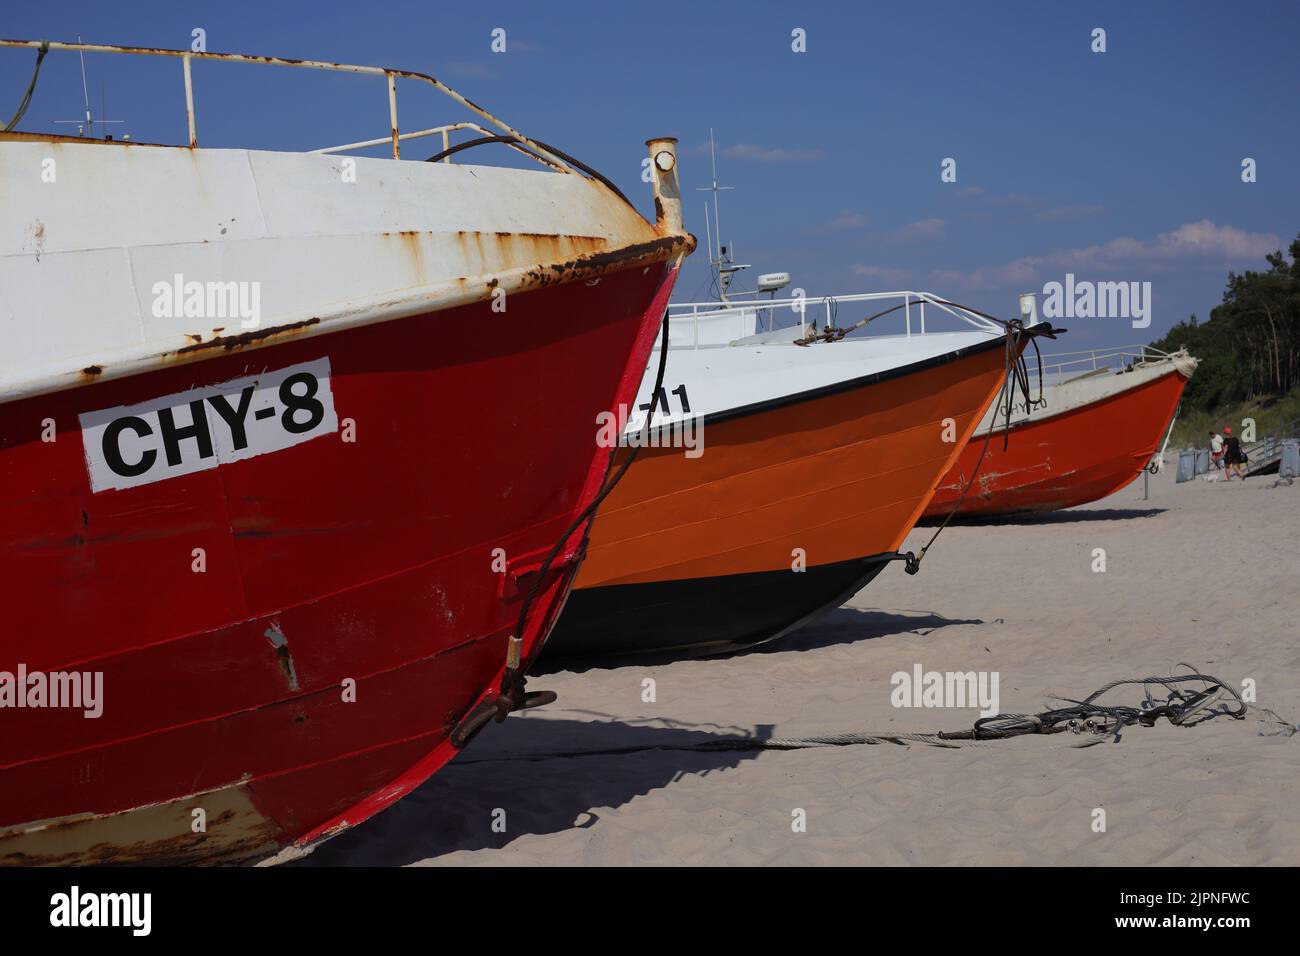 A closeup of red and orange fishing boats on the beach in Chlopy, Poland Stock Photo